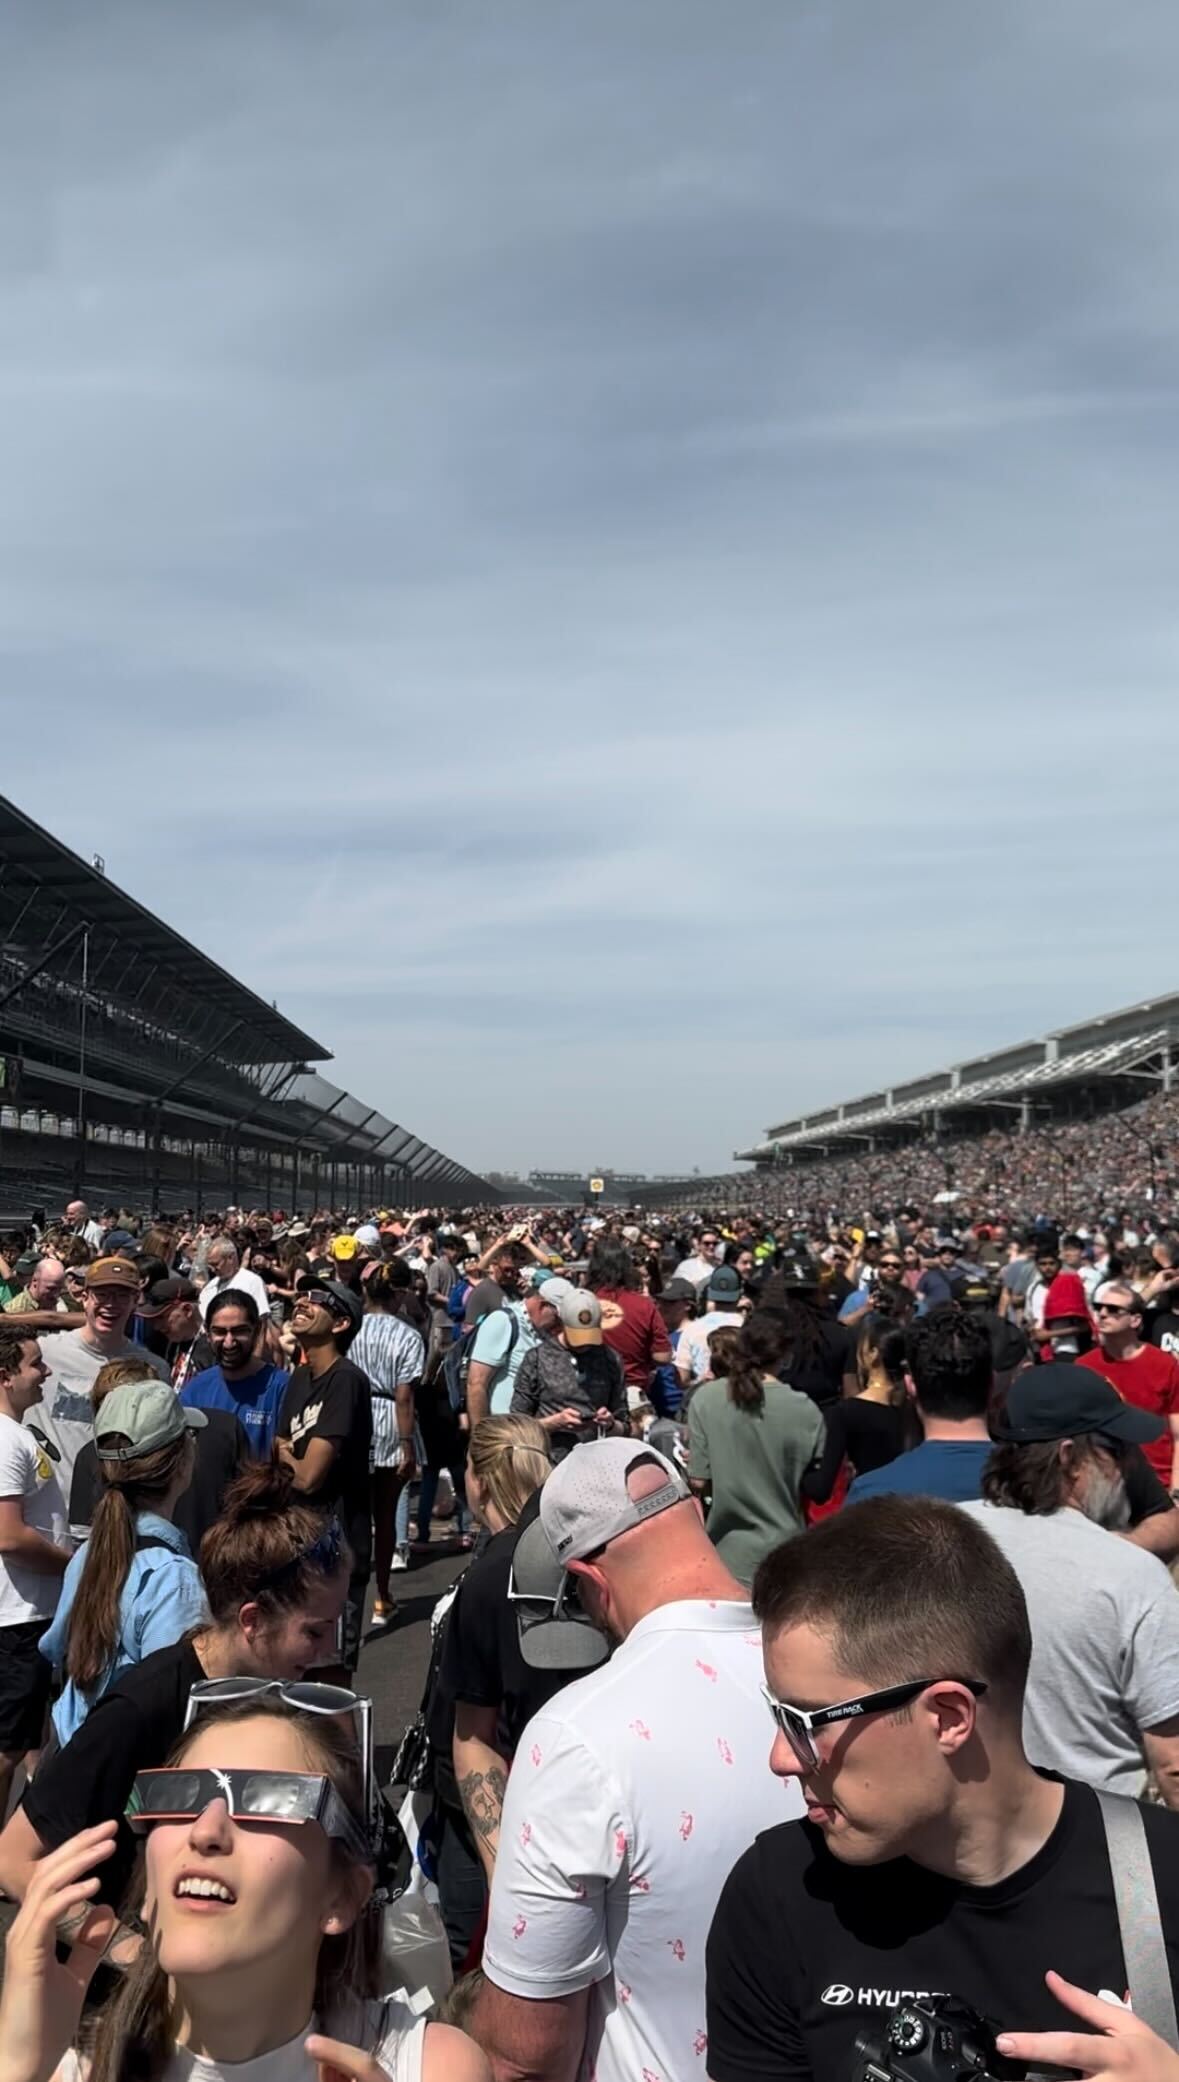 A racetrack flooded with people.